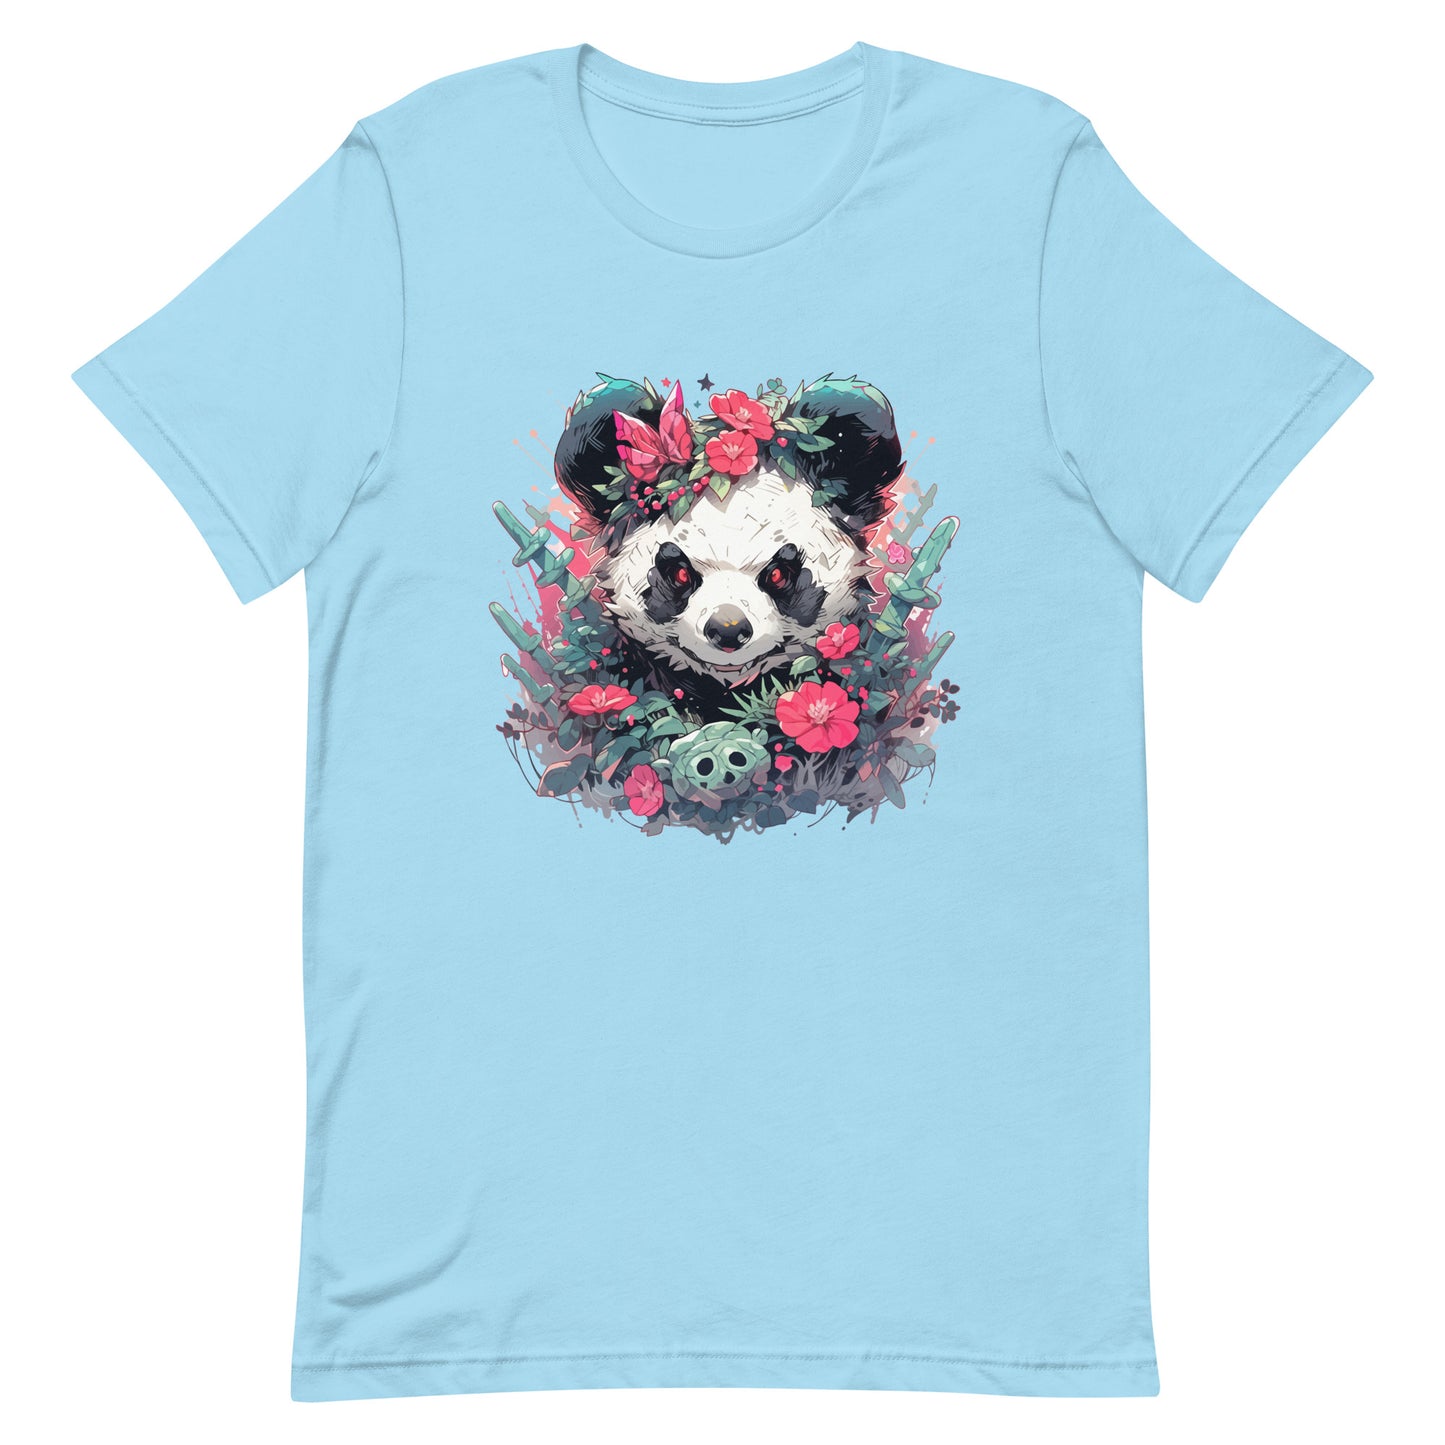 Angry panda in flowers, Bamboo bear and cactus, Black and white bear, Red eyes animal wild - Unisex t-shirt